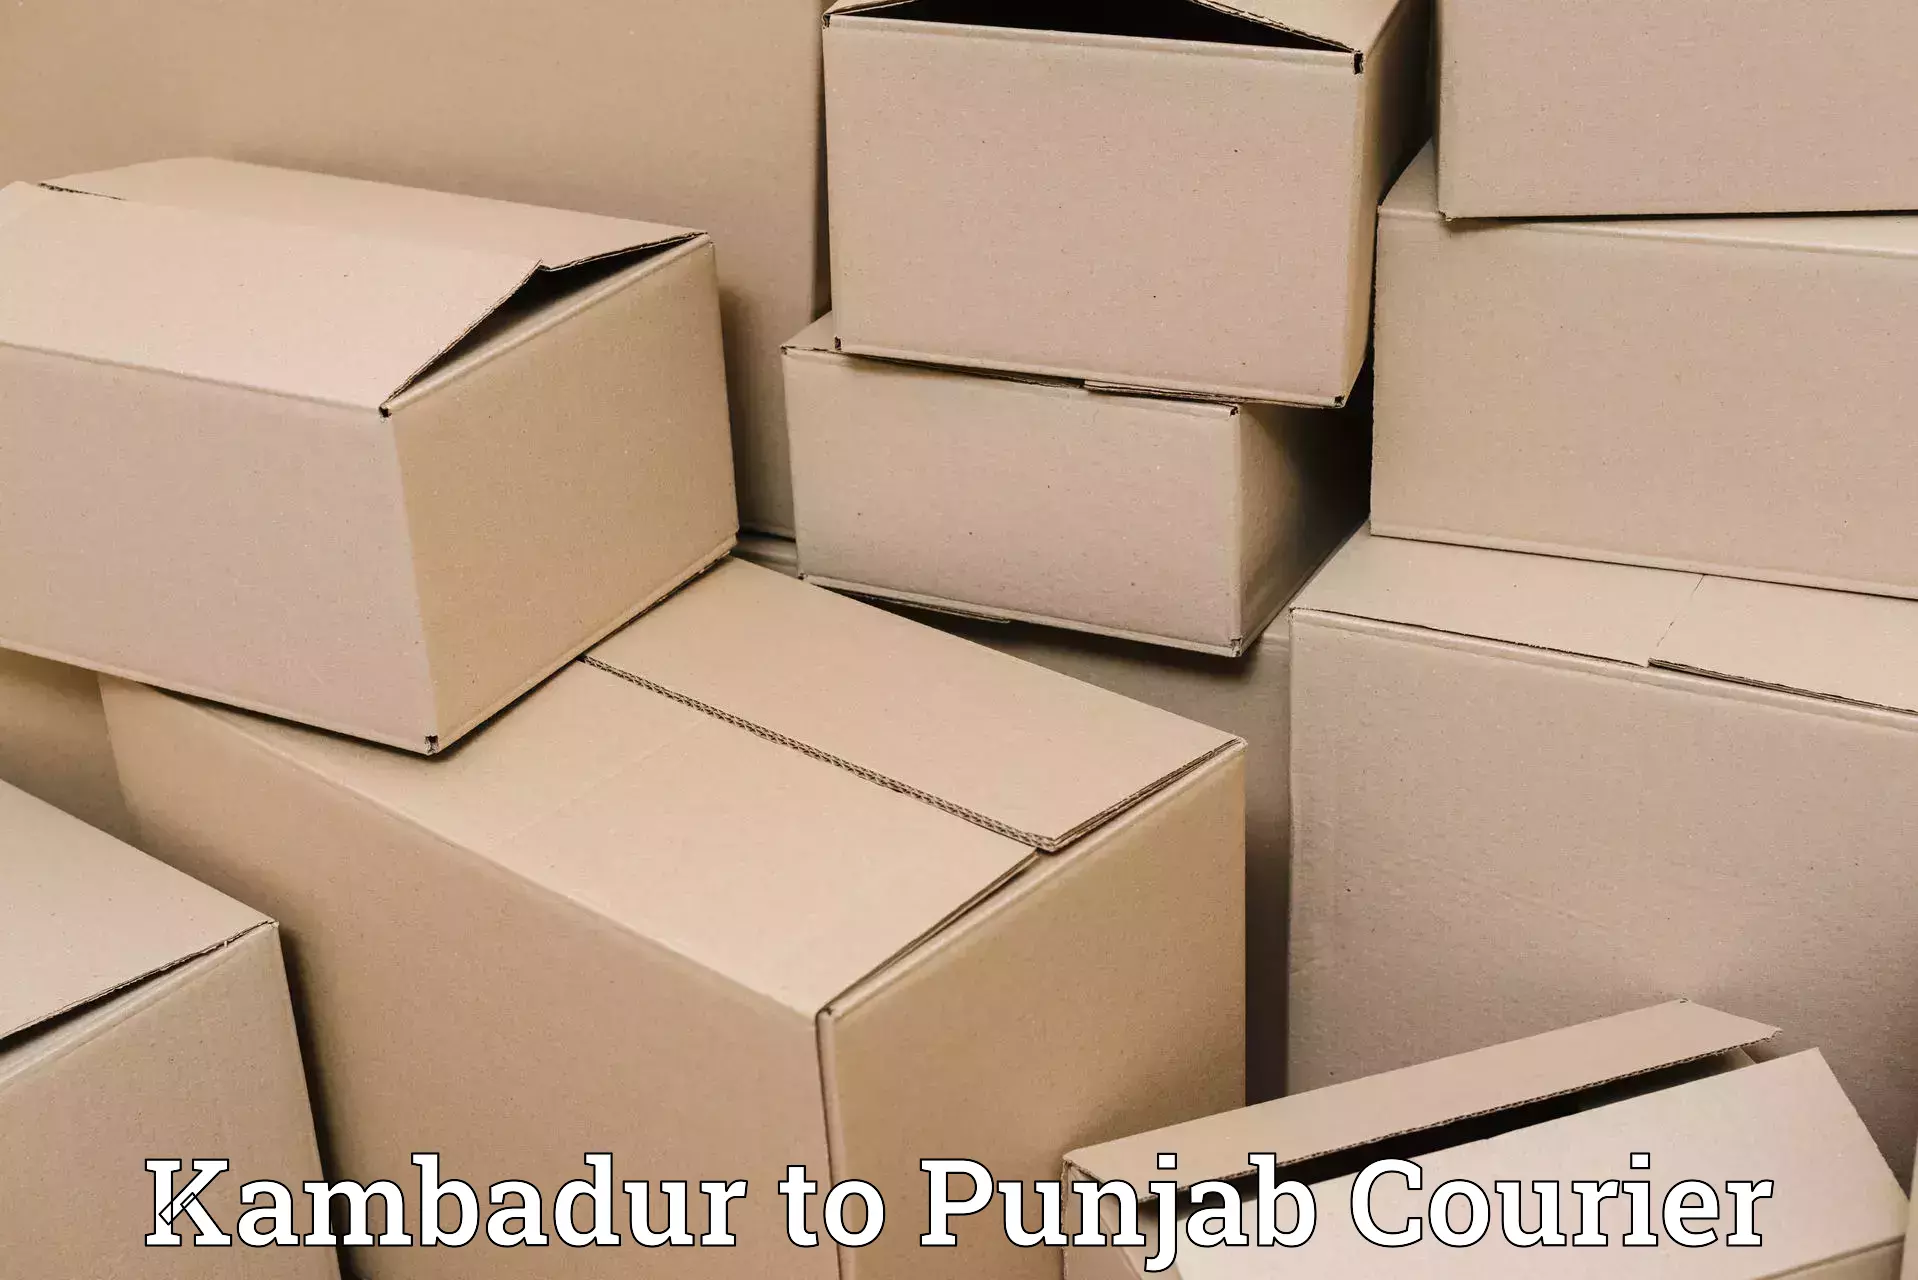 Full-service courier options Kambadur to Sultanpur Lodhi